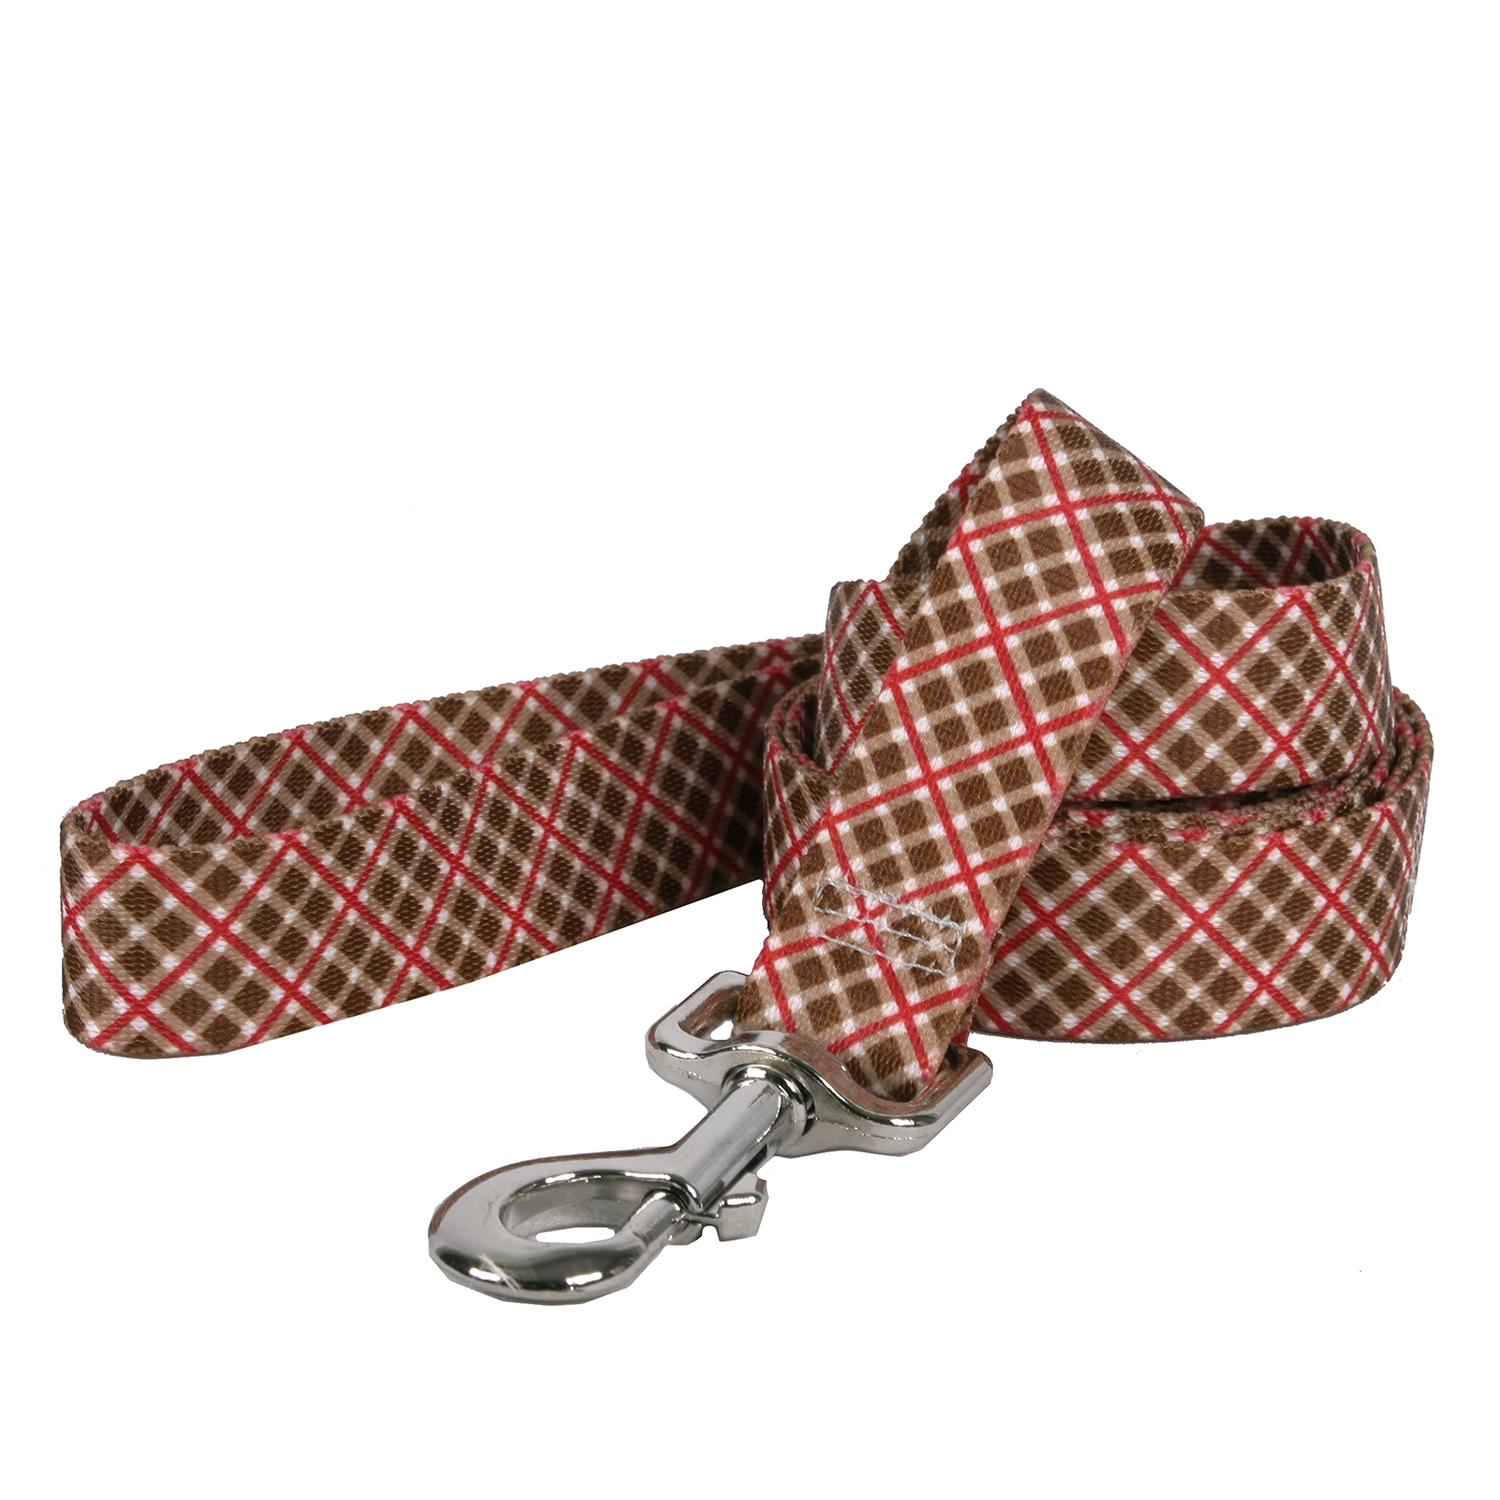 Diagonal Plaid Dog Leash by Yellow Dog - Brown and Red